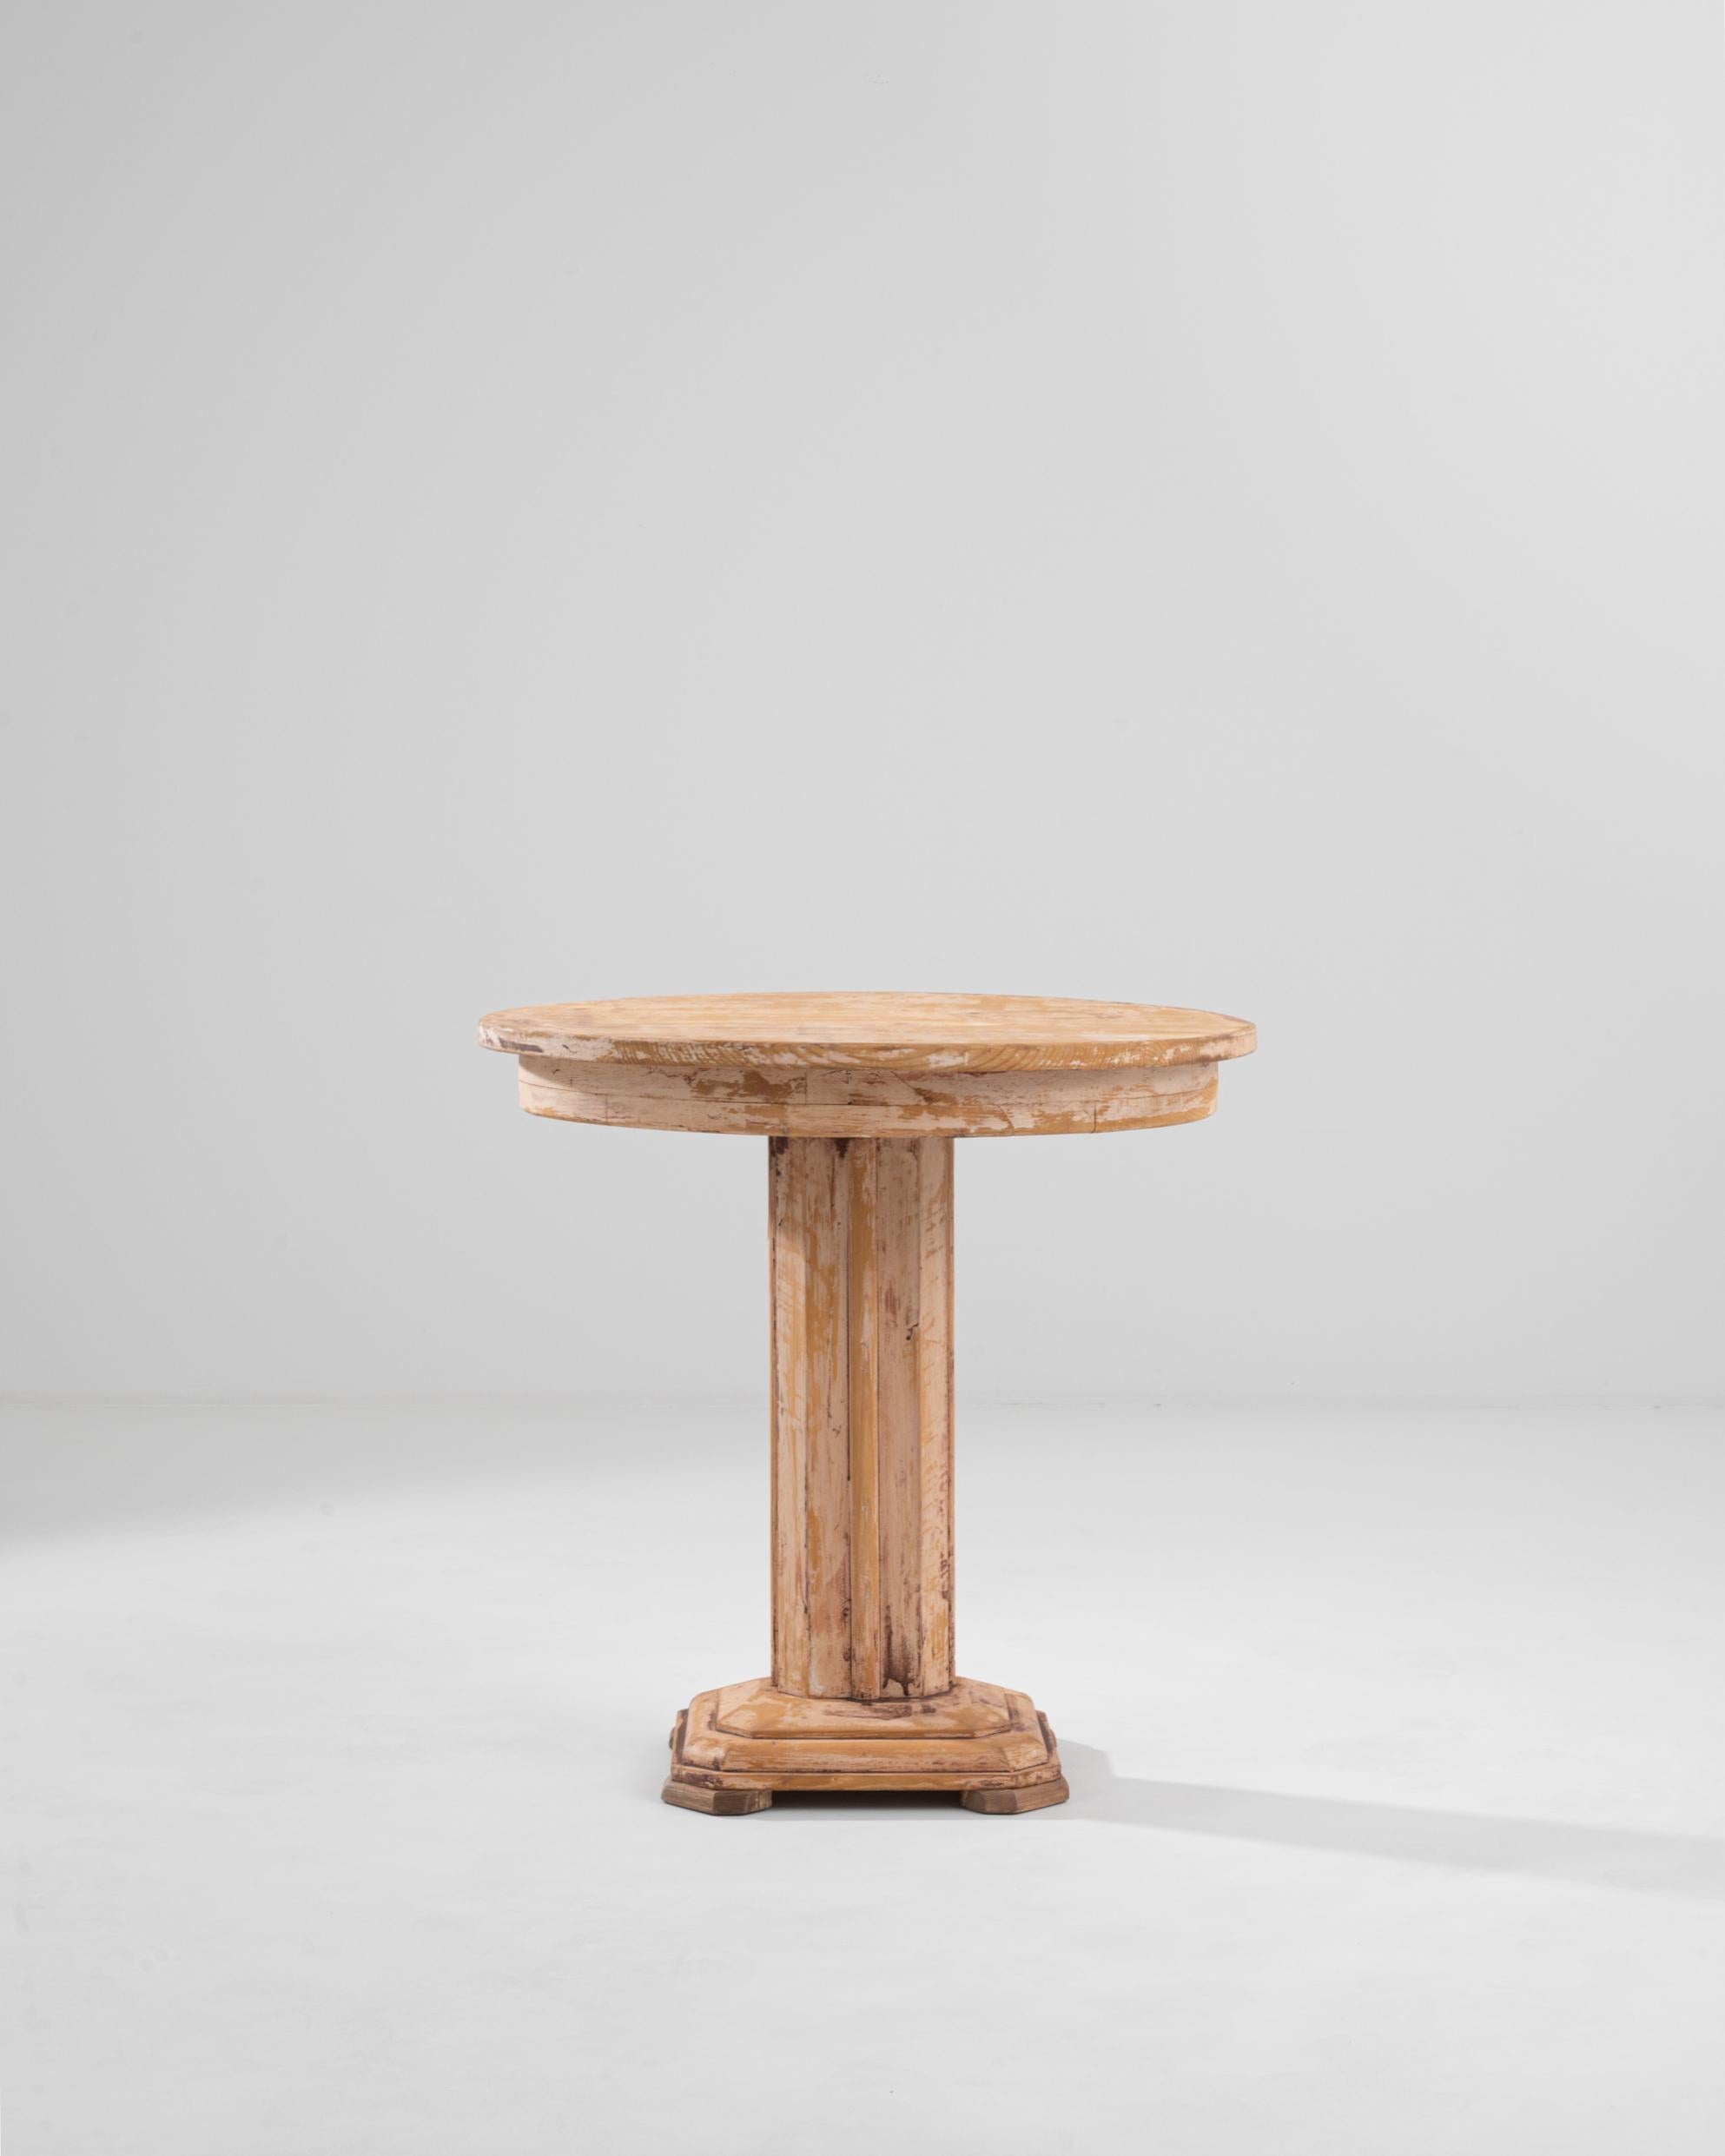 Made in Central Europe in the 1920s, this vintage wooden side table combines a graceful silhouette with a unique patina. The stripped-back simplicity of the design has an inherent elegance and equilibrium: a round tabletop rests atop a central